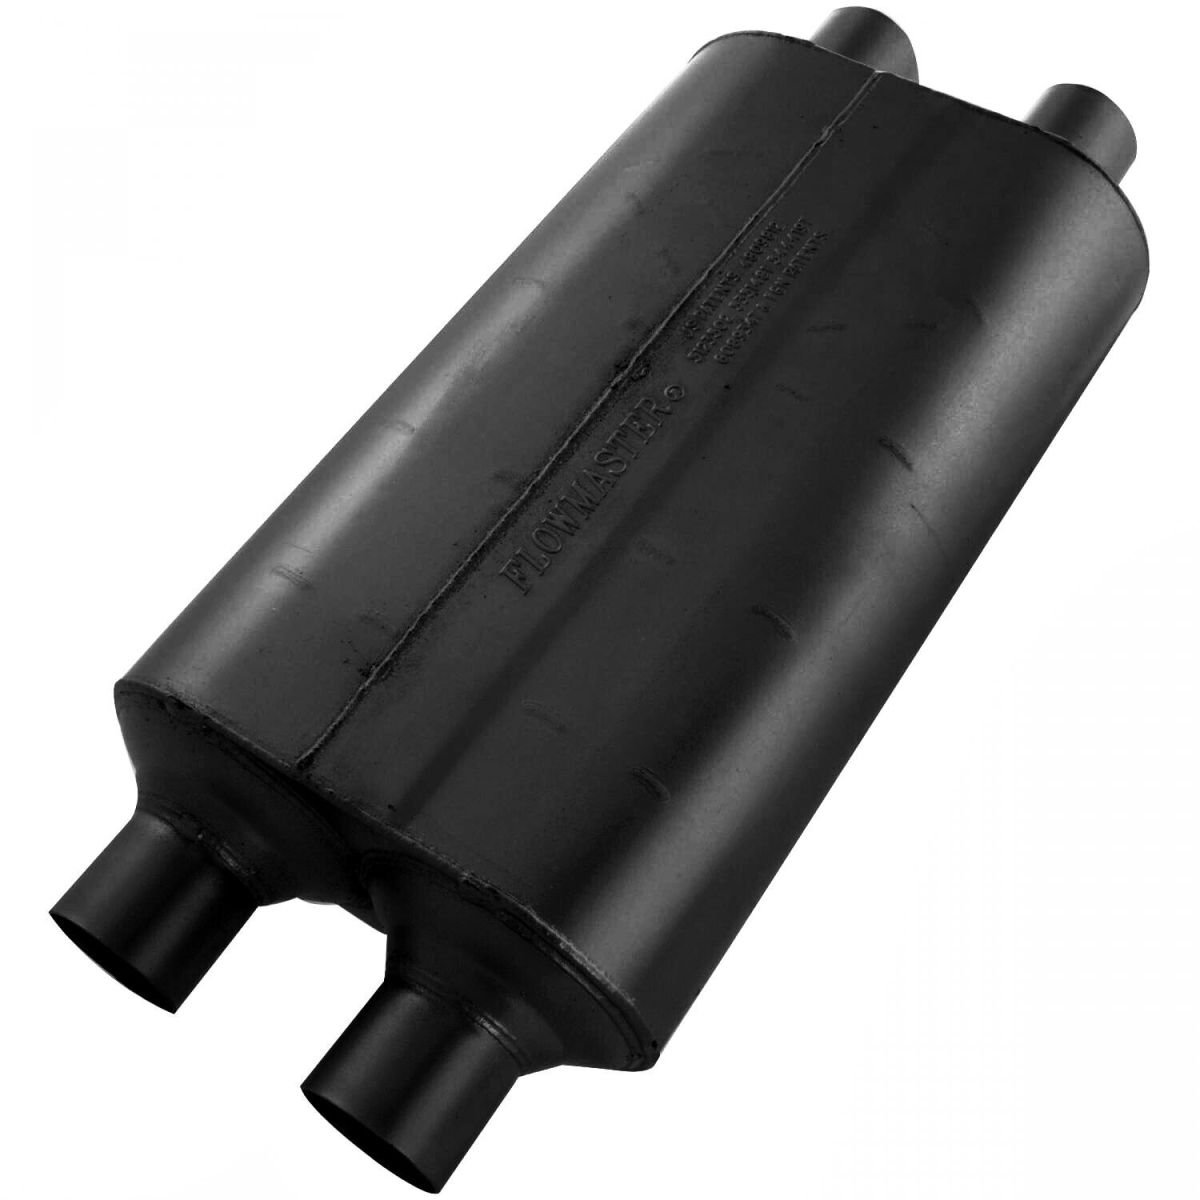 Flowmaster - Flowmaster Super 50 Series 2.25" Dual Inlet/Outlet Universal Chambered Muffler